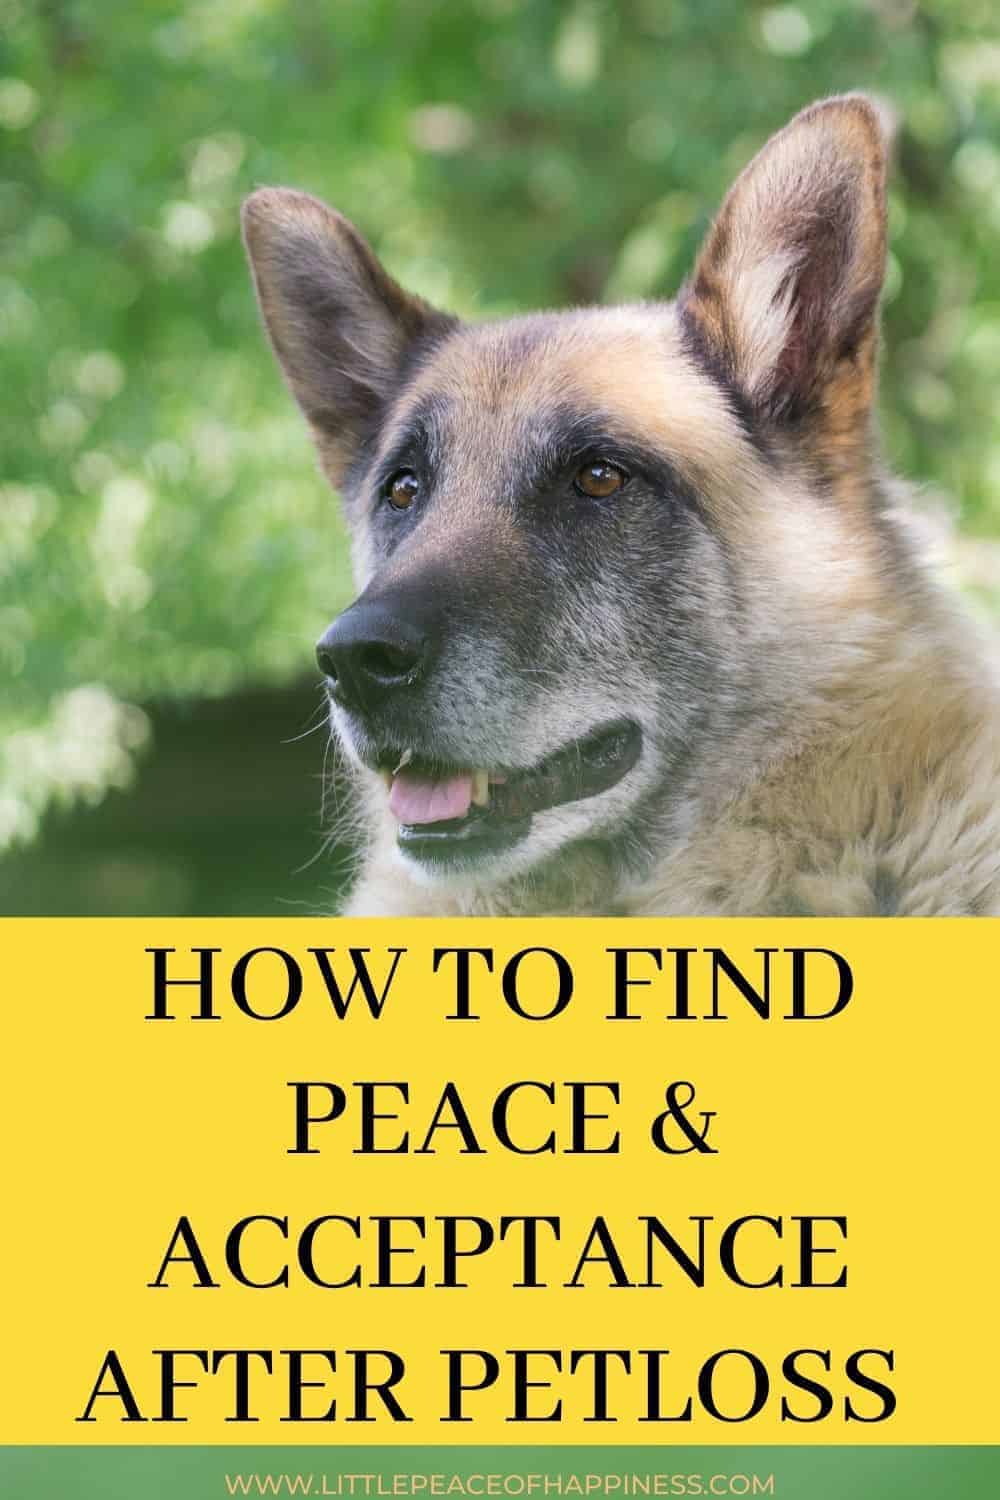 how to find peace and acceptance after pet loss